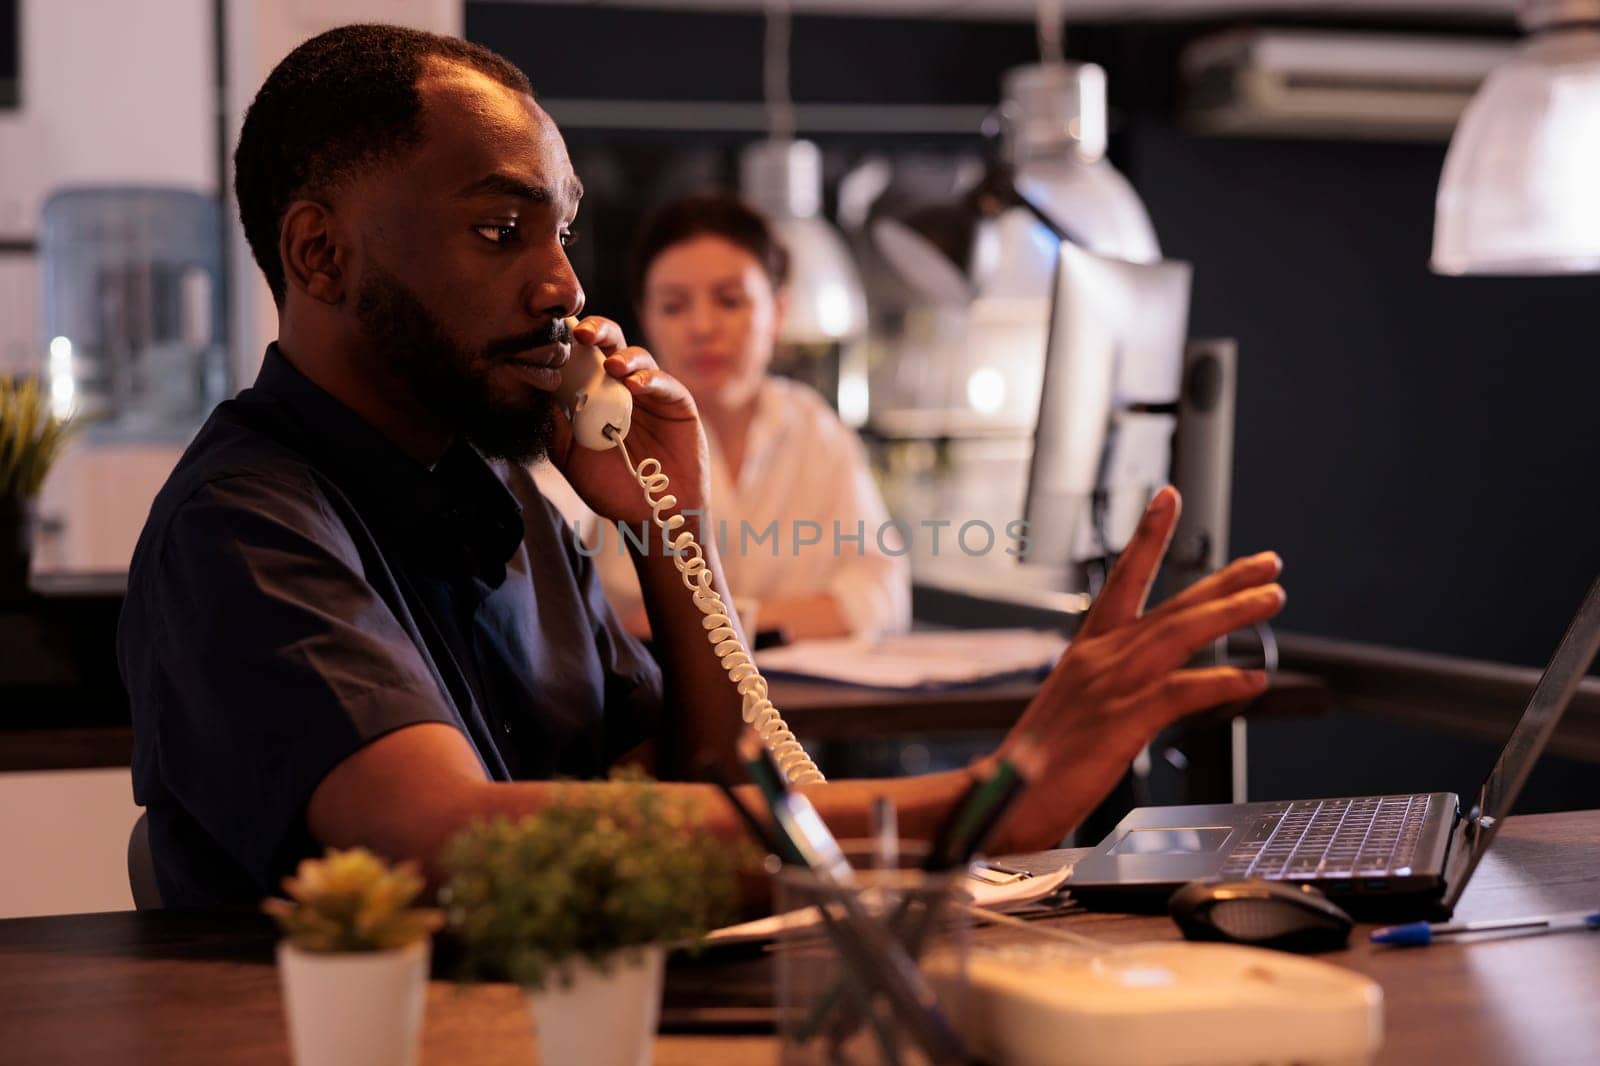 Corporate worker discussing business plan with teamlead on landline phone, employee answering call in office at night. African american man communication in coworking space with sunset light